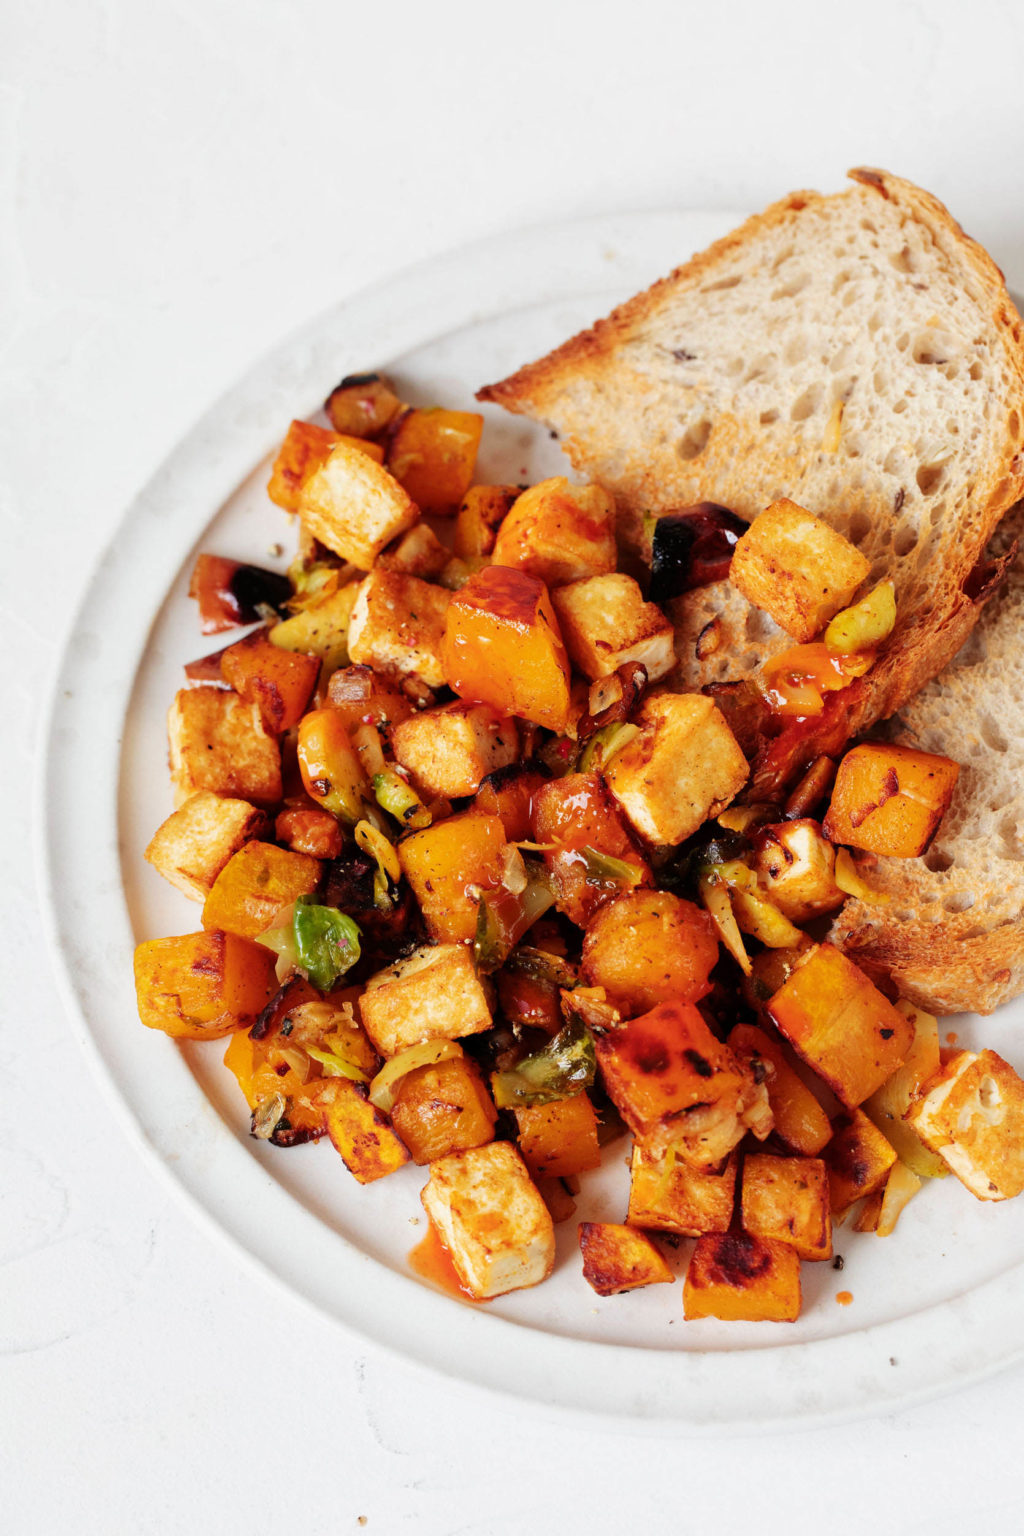 A round, white plate serves a slice of bread and an orange-colored butternut squash hash.